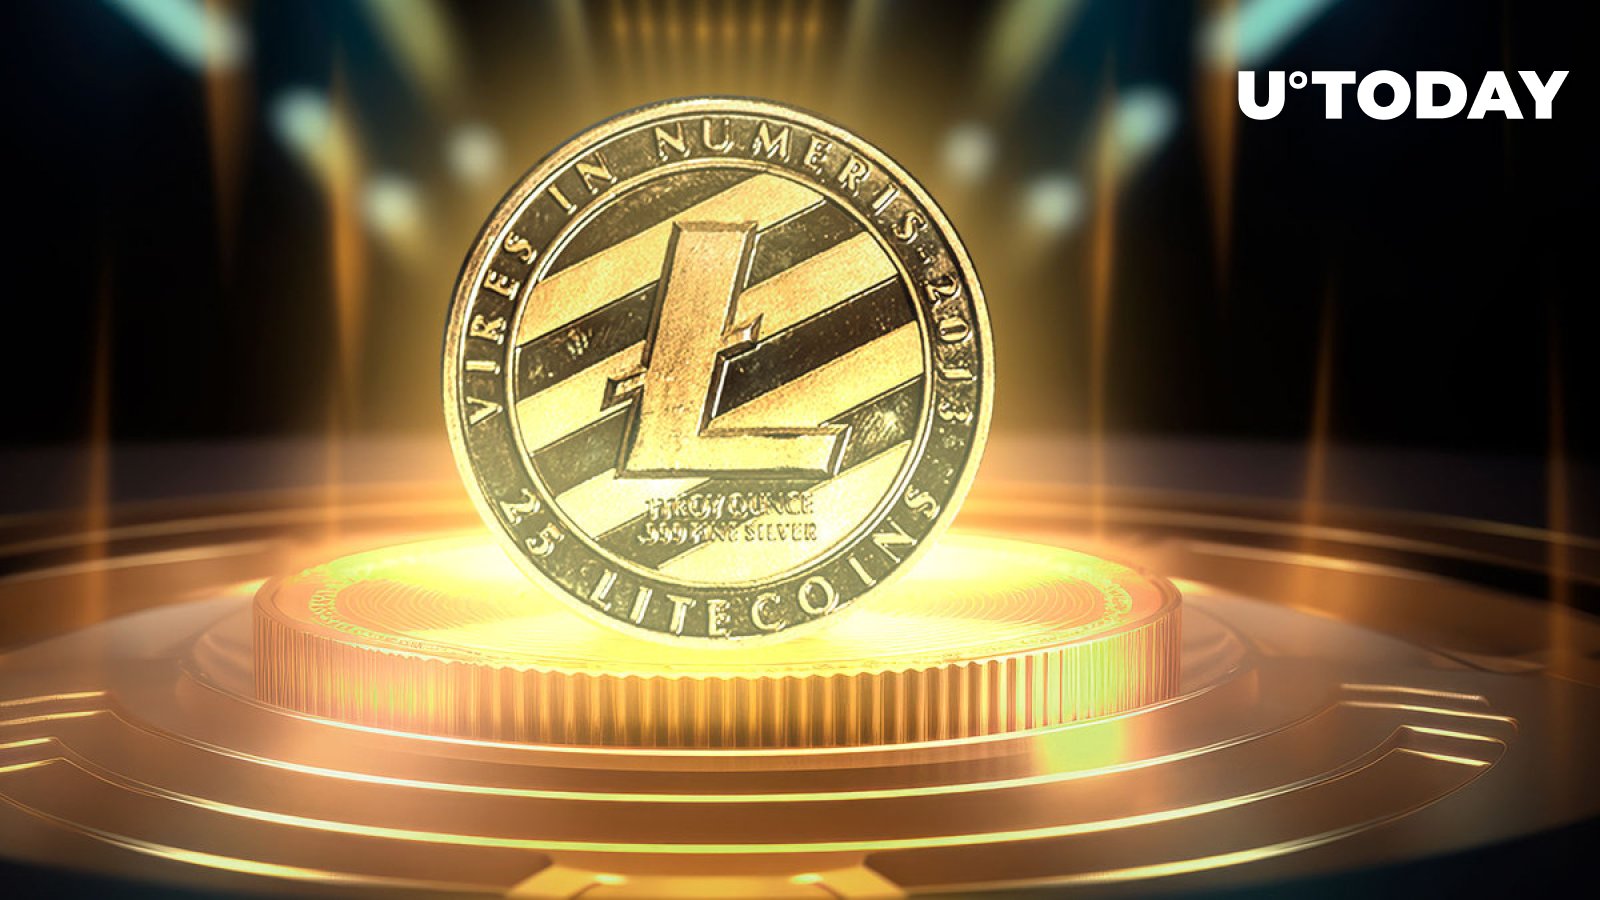 Litecoin (LTC) Smashes New All-Time High But Not in Price